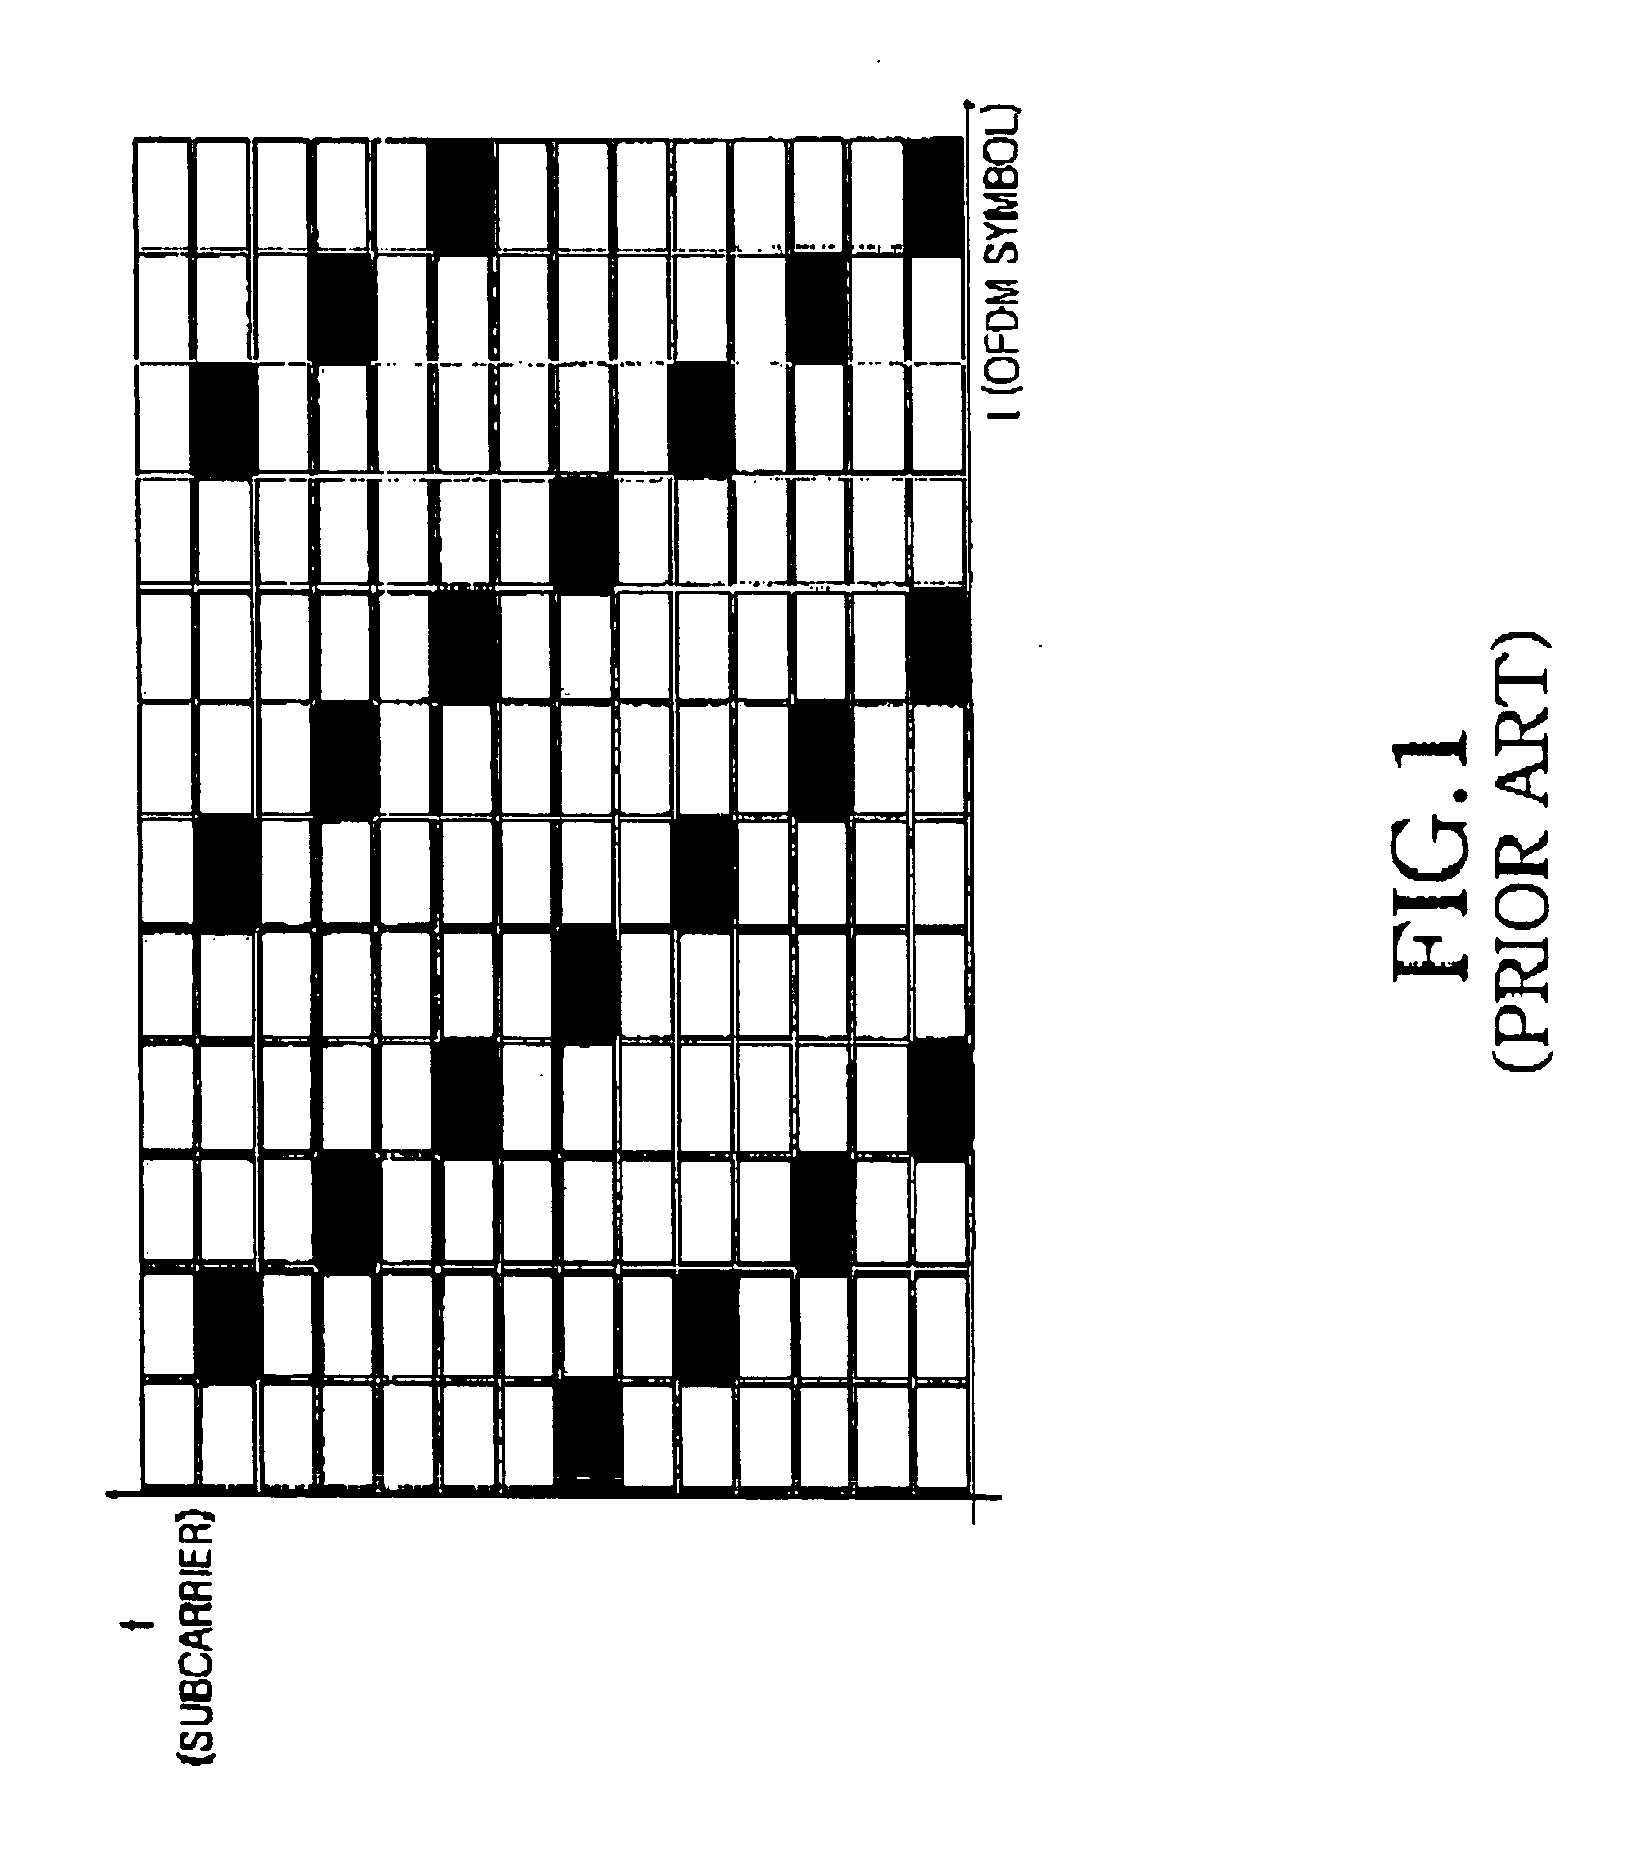 Apparatus and method for transmitting/receiving pilot signals in an OFDM communication system